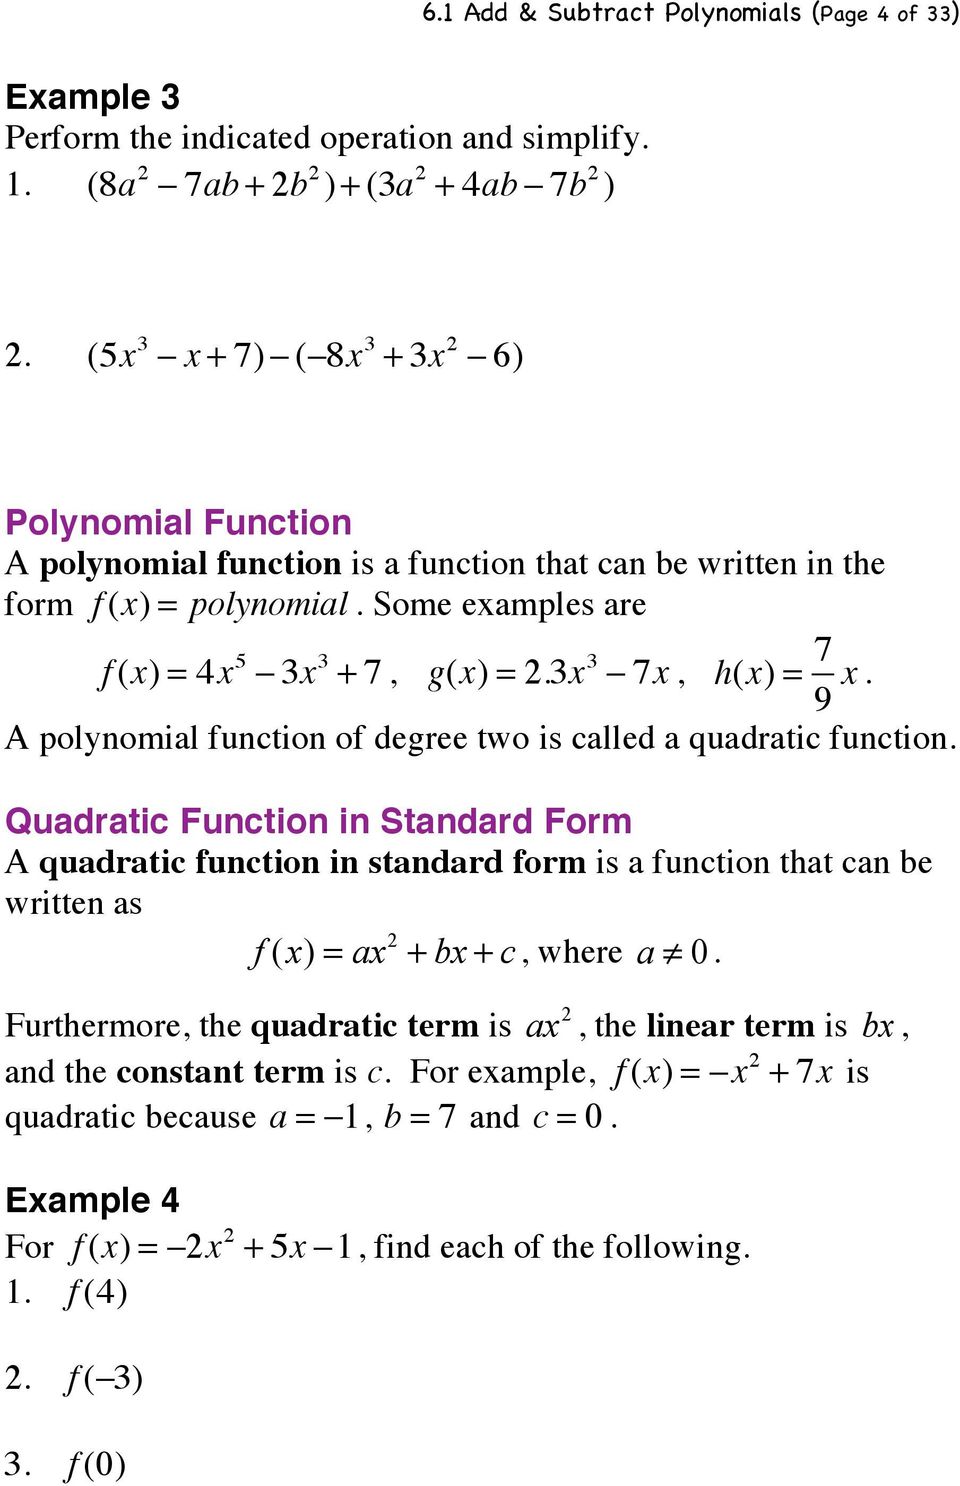 A polynomial function of degree two is called a quadratic function.